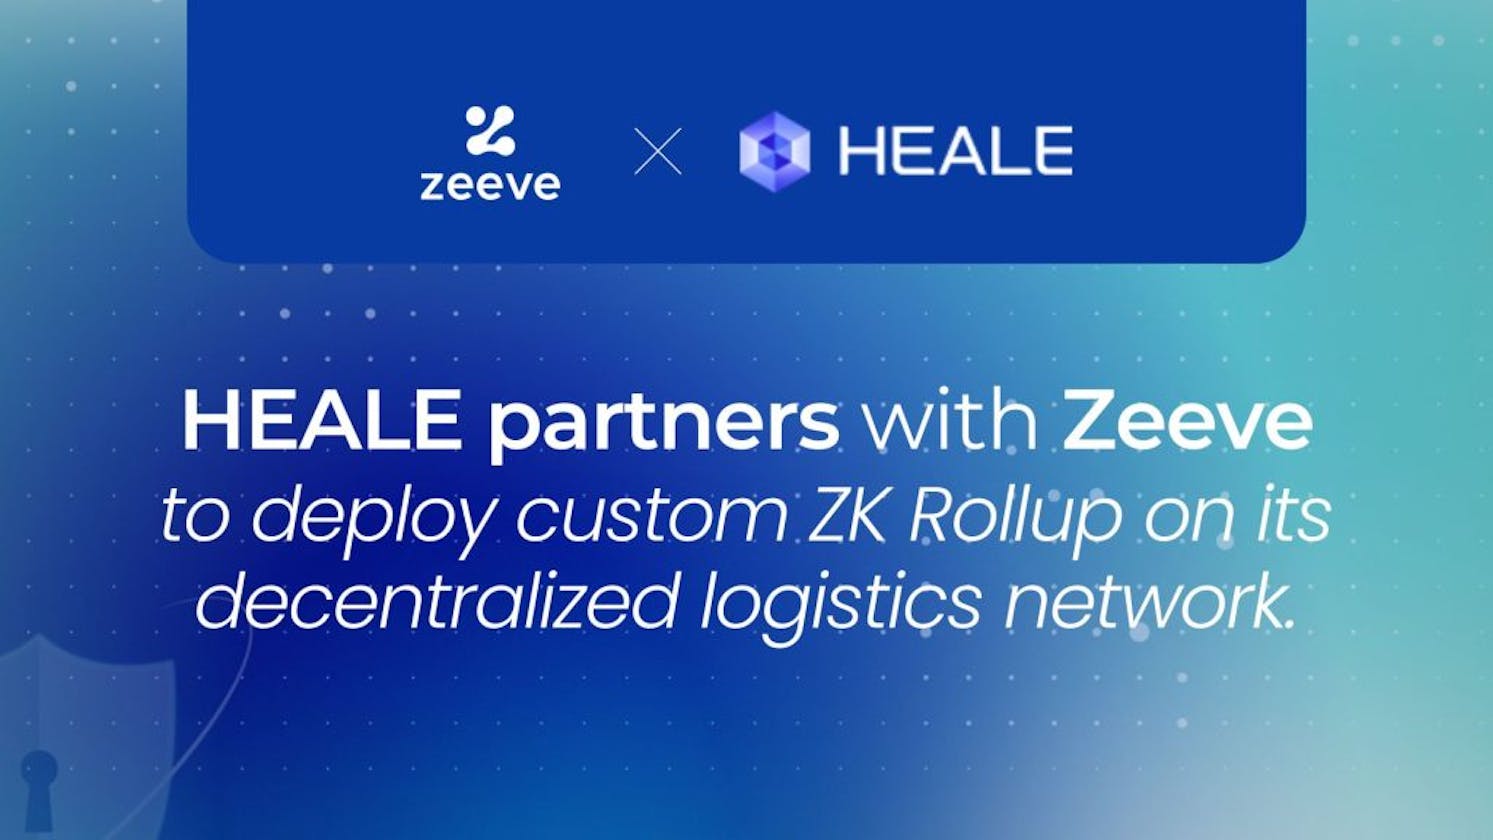 HEALE partners with Zeeve to deploy custom ZK Rollup on its decentralized logistics network